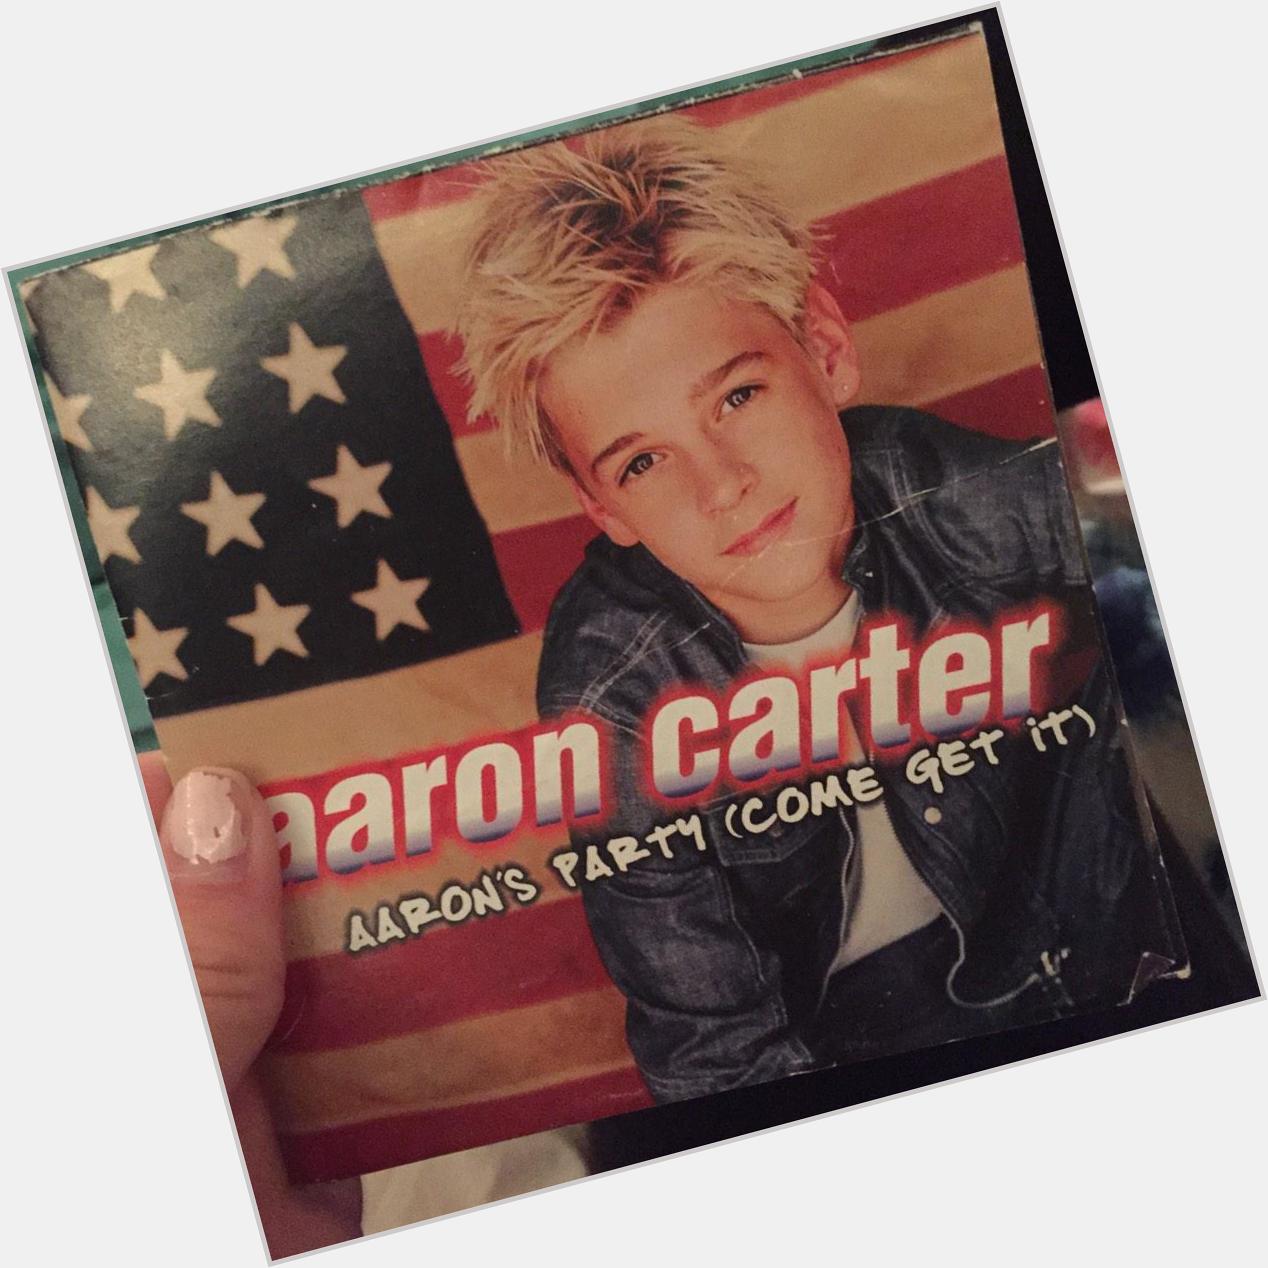 It truly is a Happy birthday to me! I found my old Aaron Carter CD 